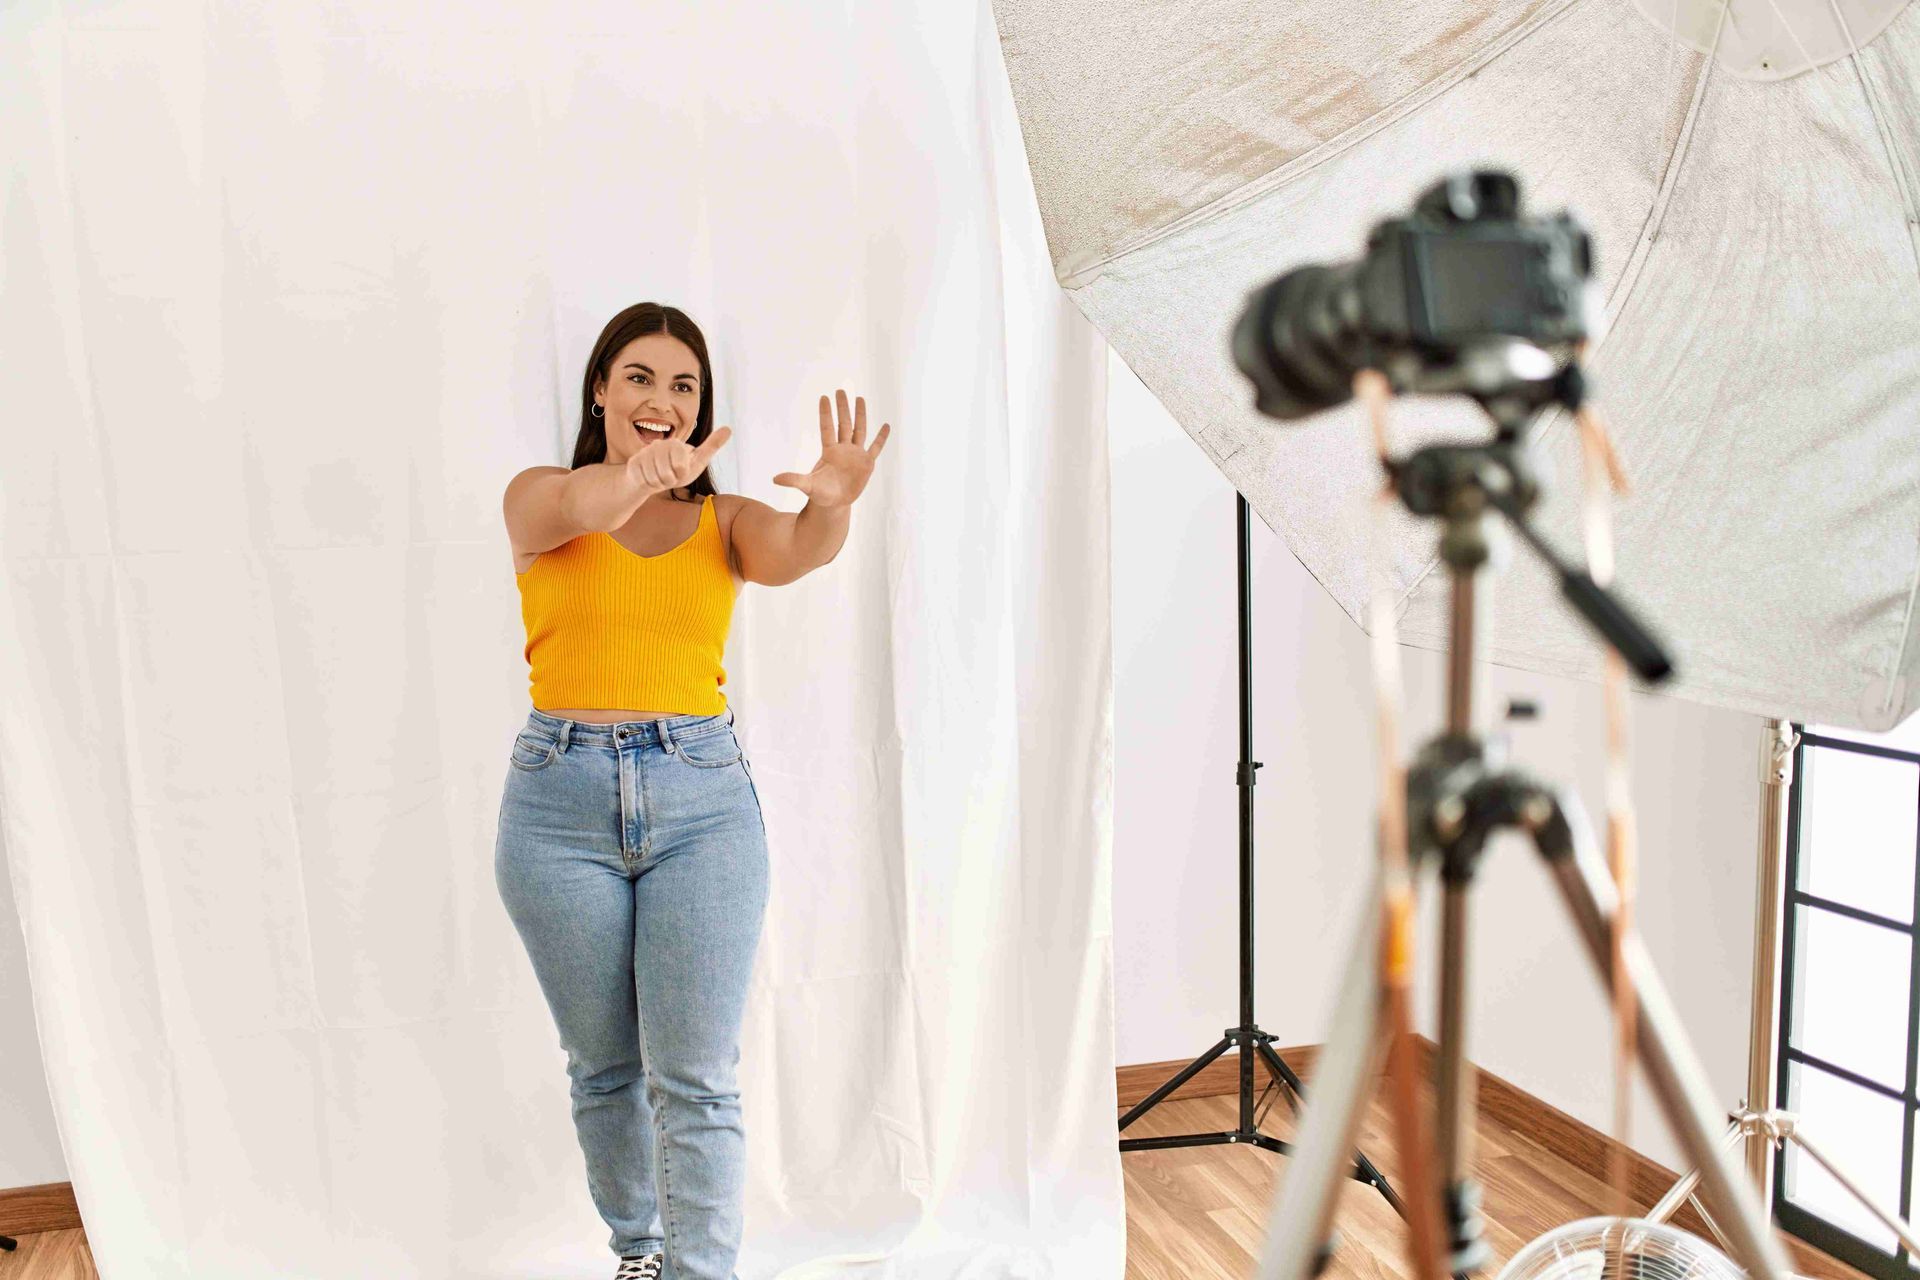 A woman doing a photoshoot in yellow shirt and jeans